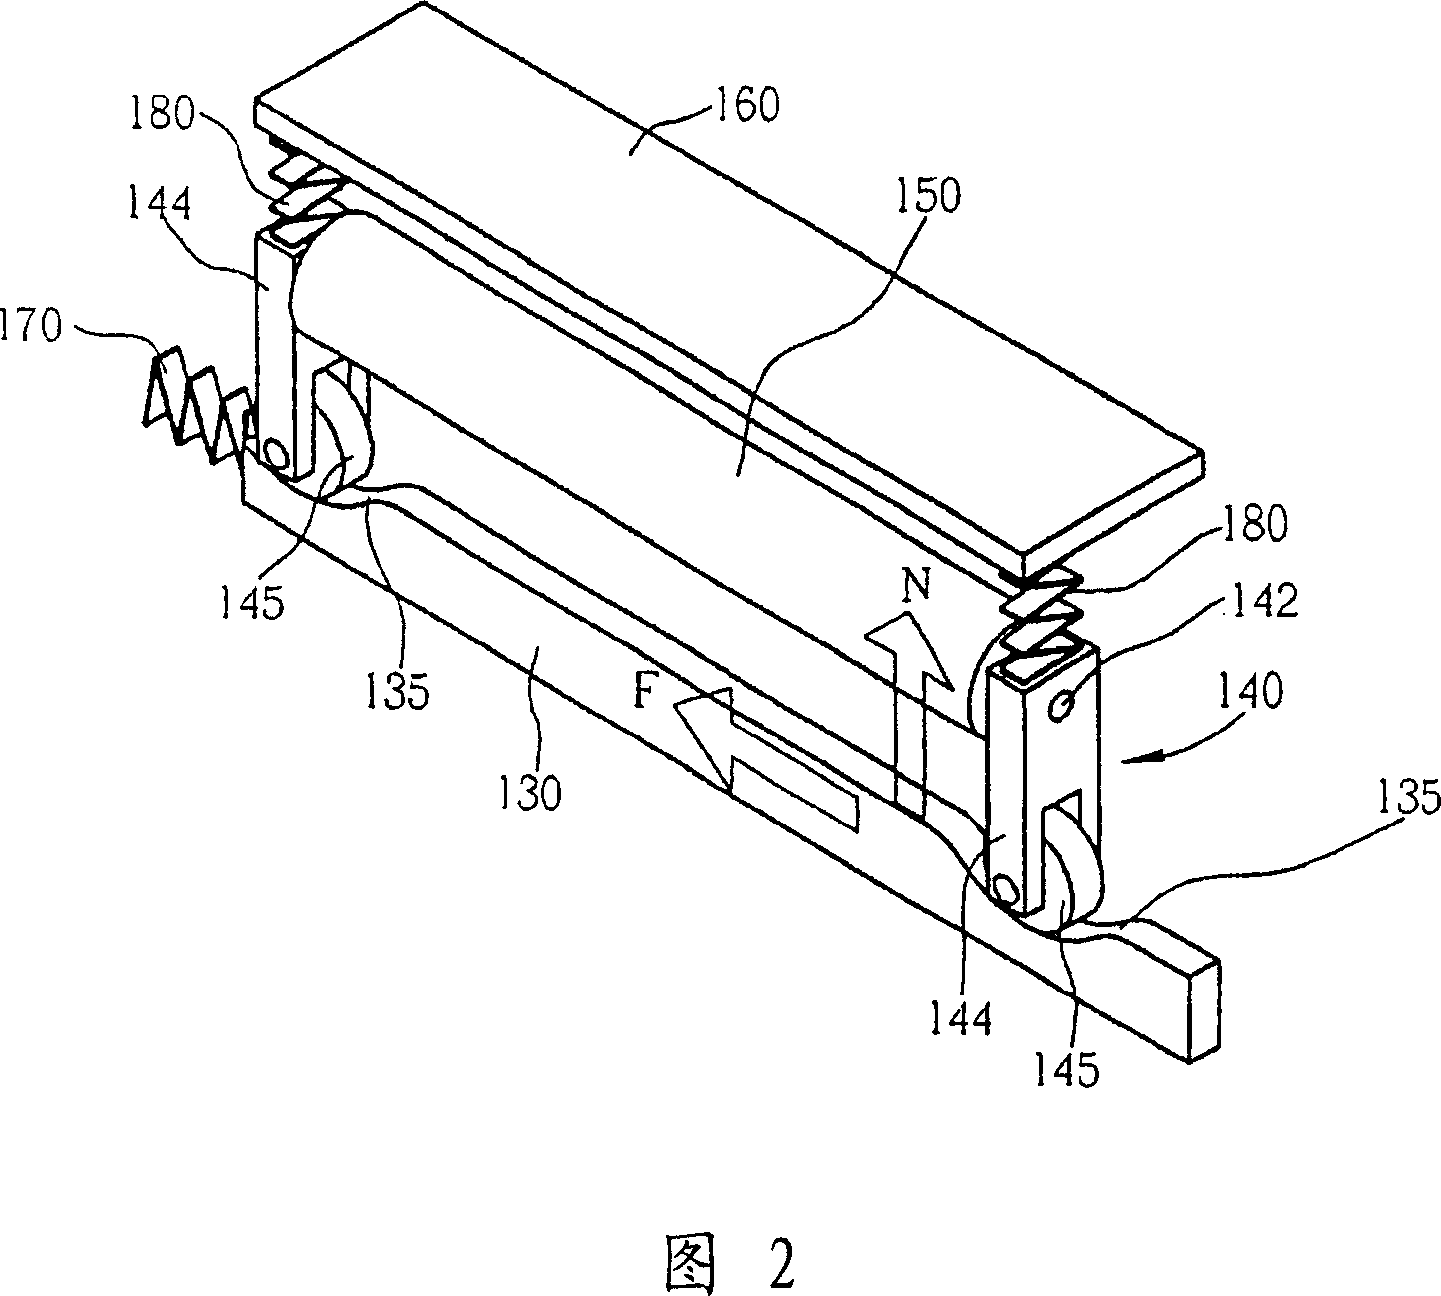 Photographic printing machine having translational cam mechanism for driving paper-pressing drum vertically lifting/lowering